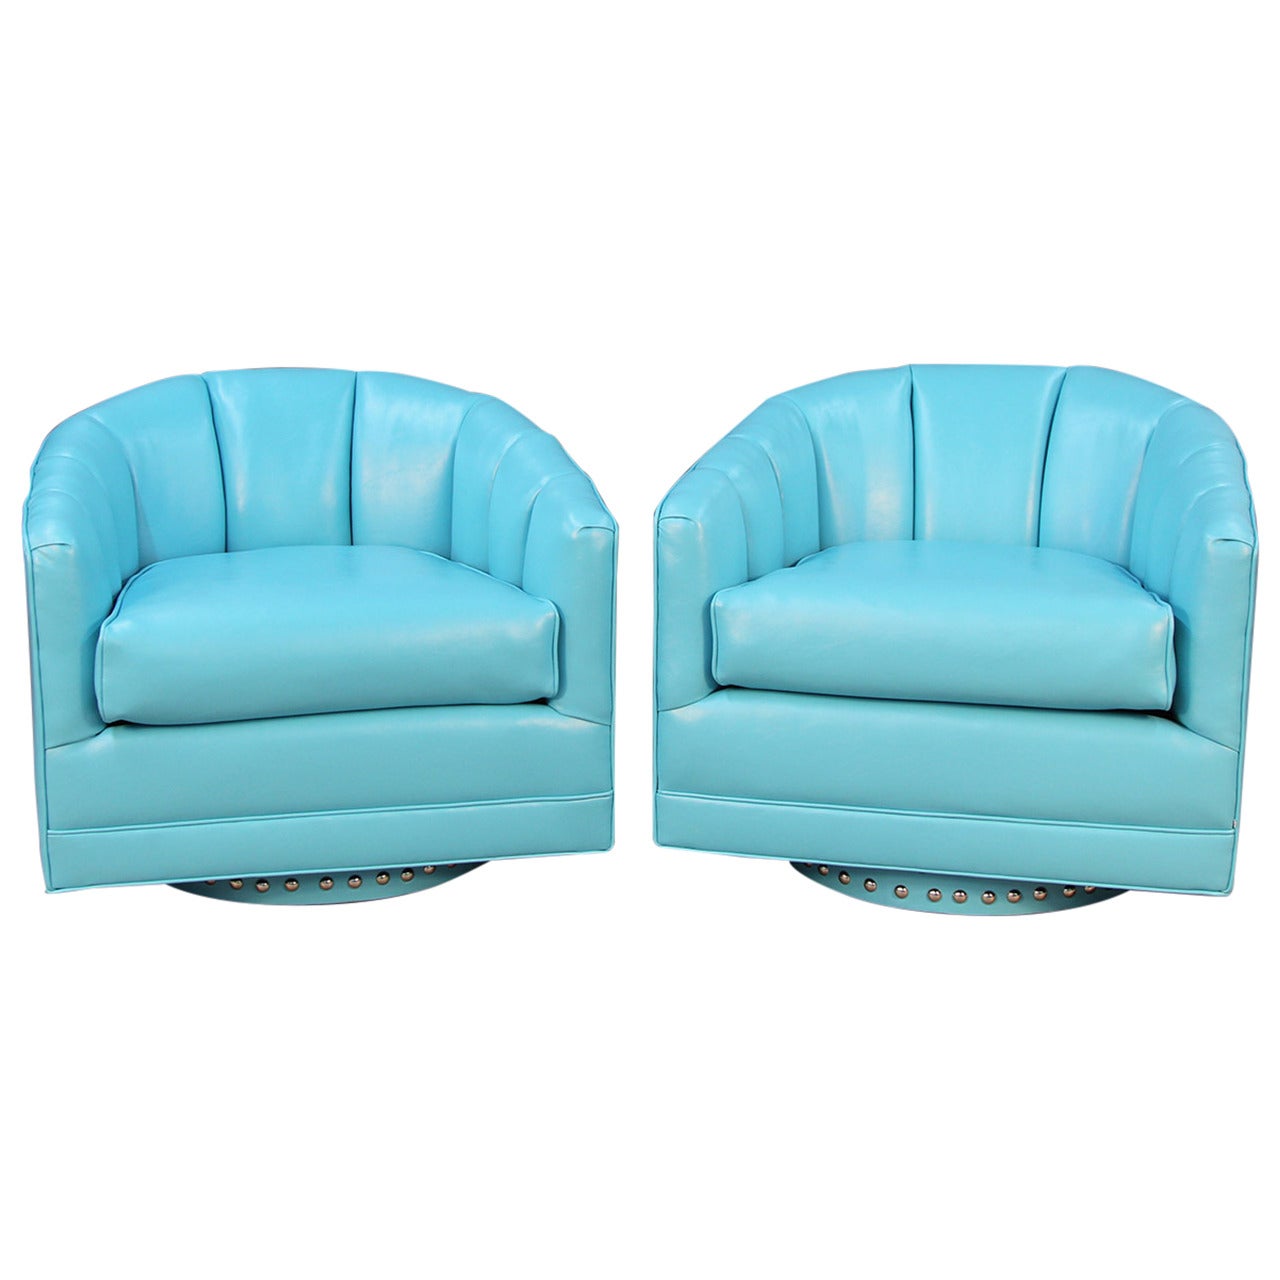 Beachouse Blue Swivel Chairs attributed to Milo Baughman For Sale